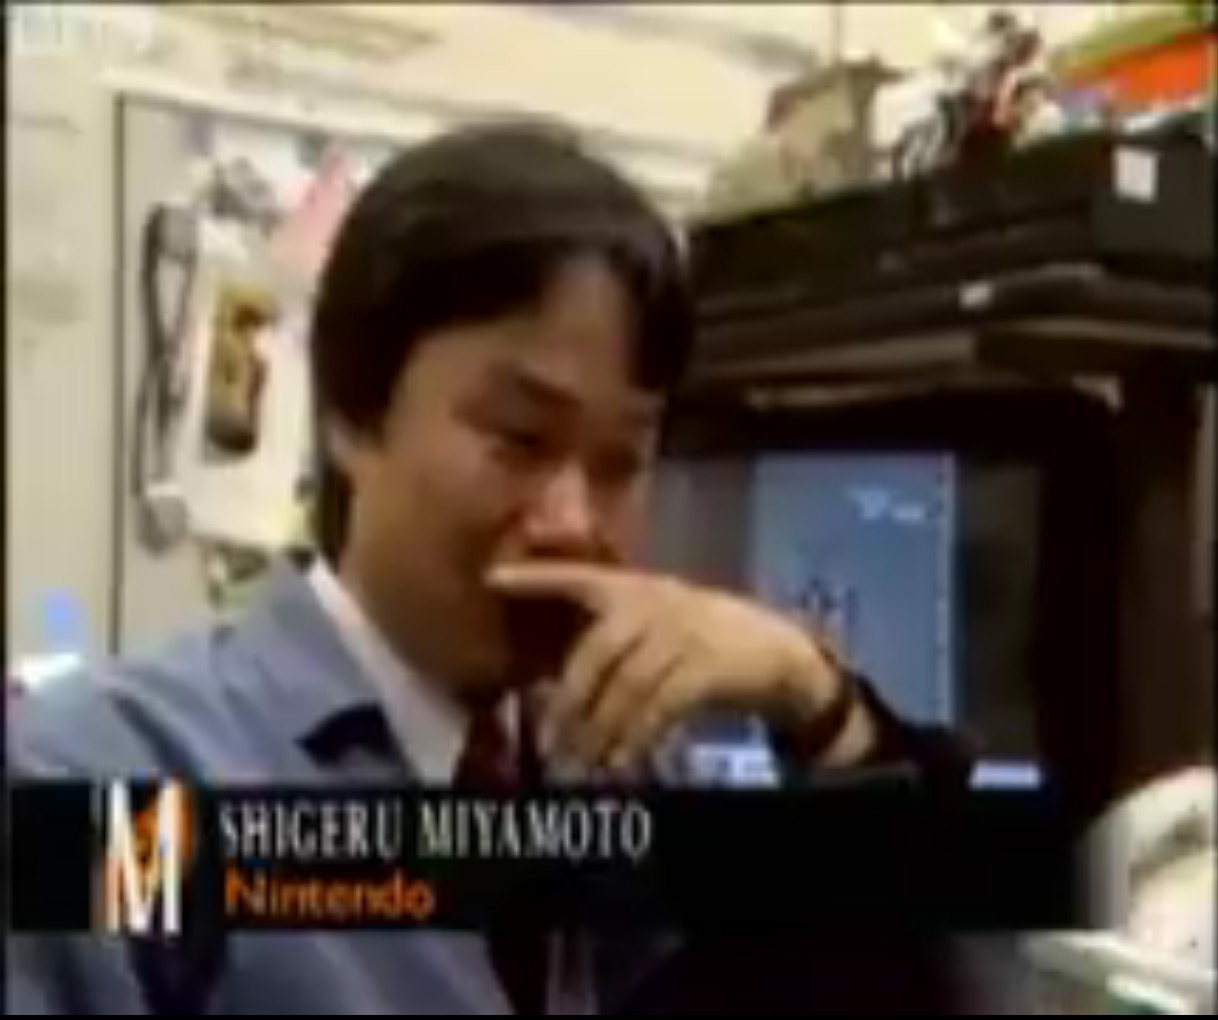 BBC Archive - #OnThisDay 1889: Nintendo was founded! In